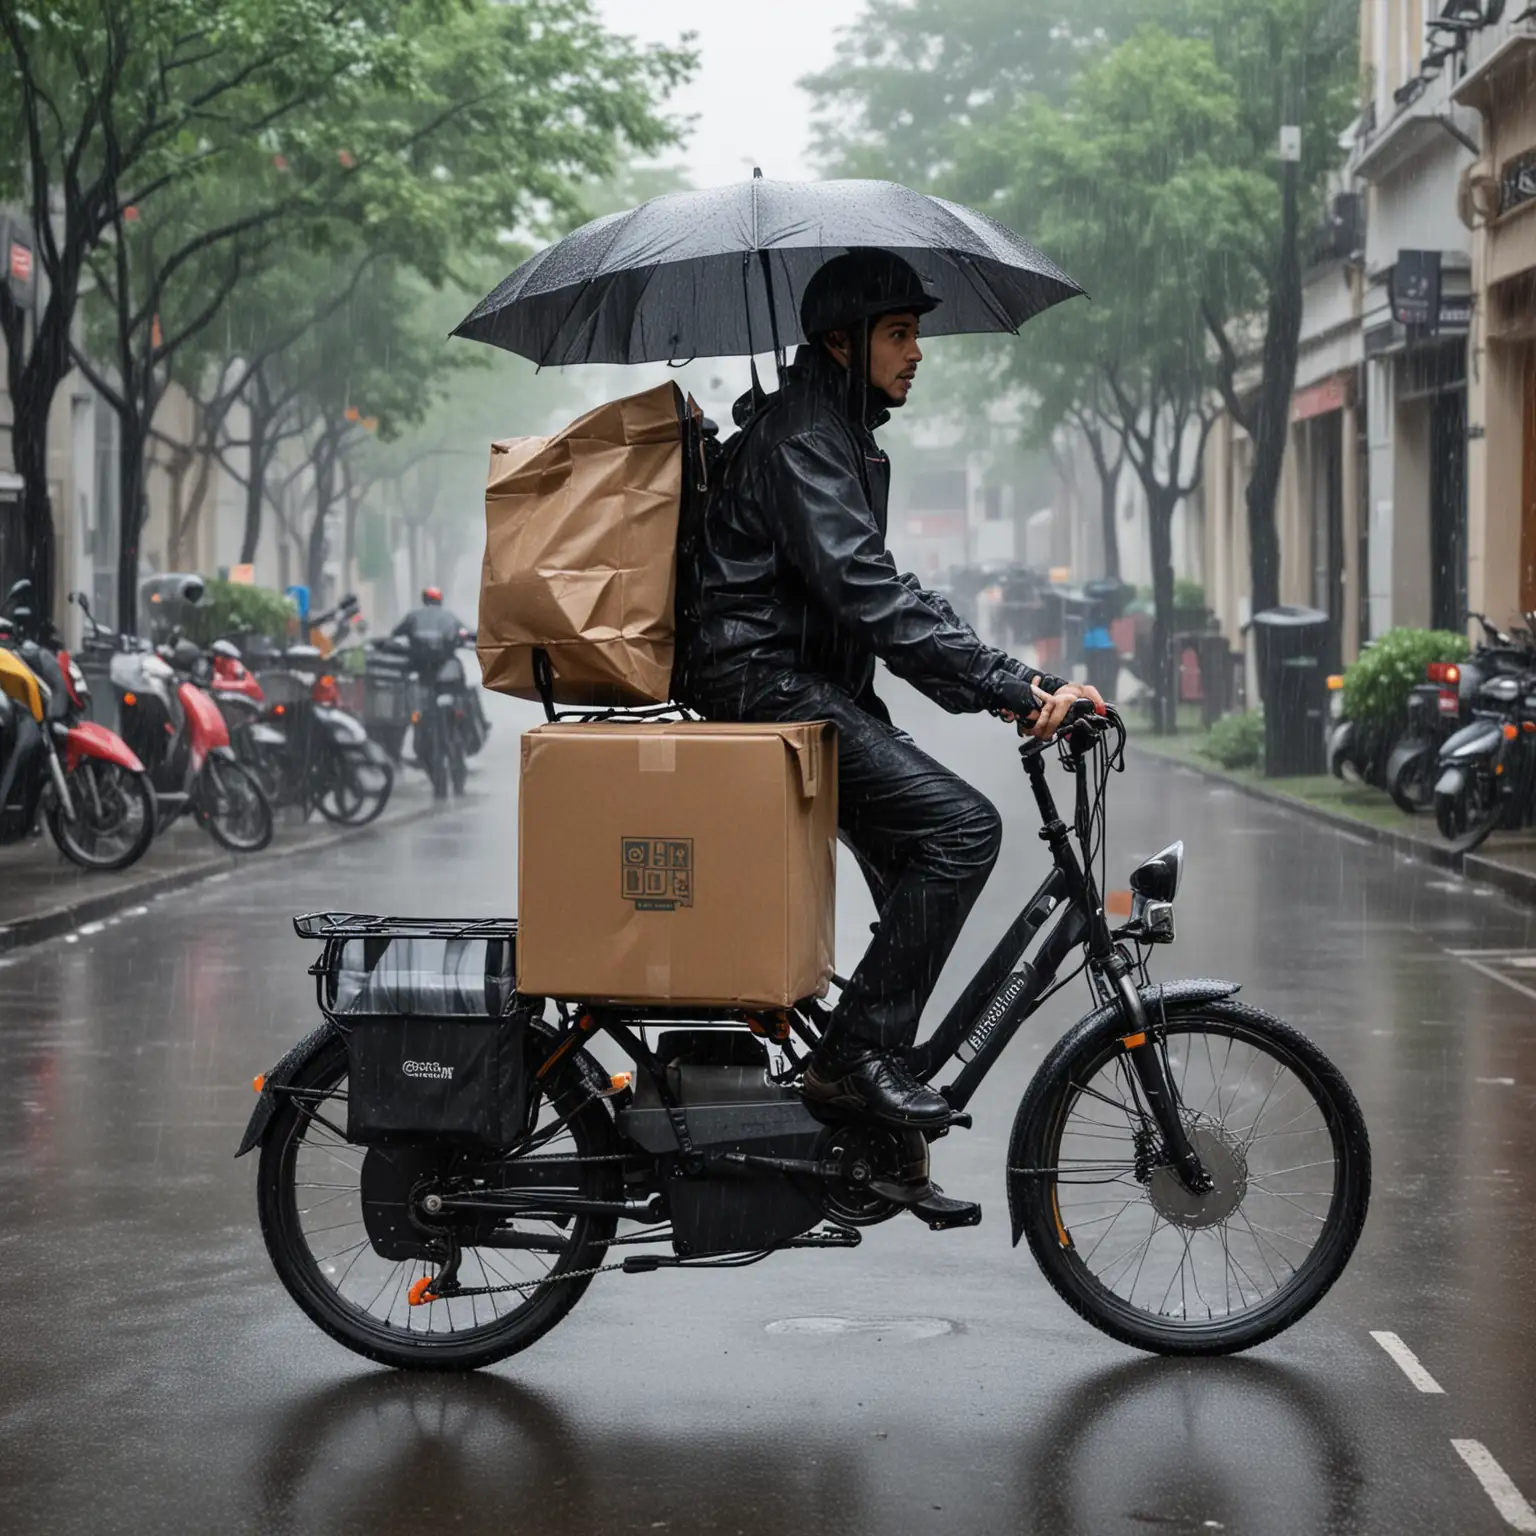 a deliveryman riding an electric bike in the downpour